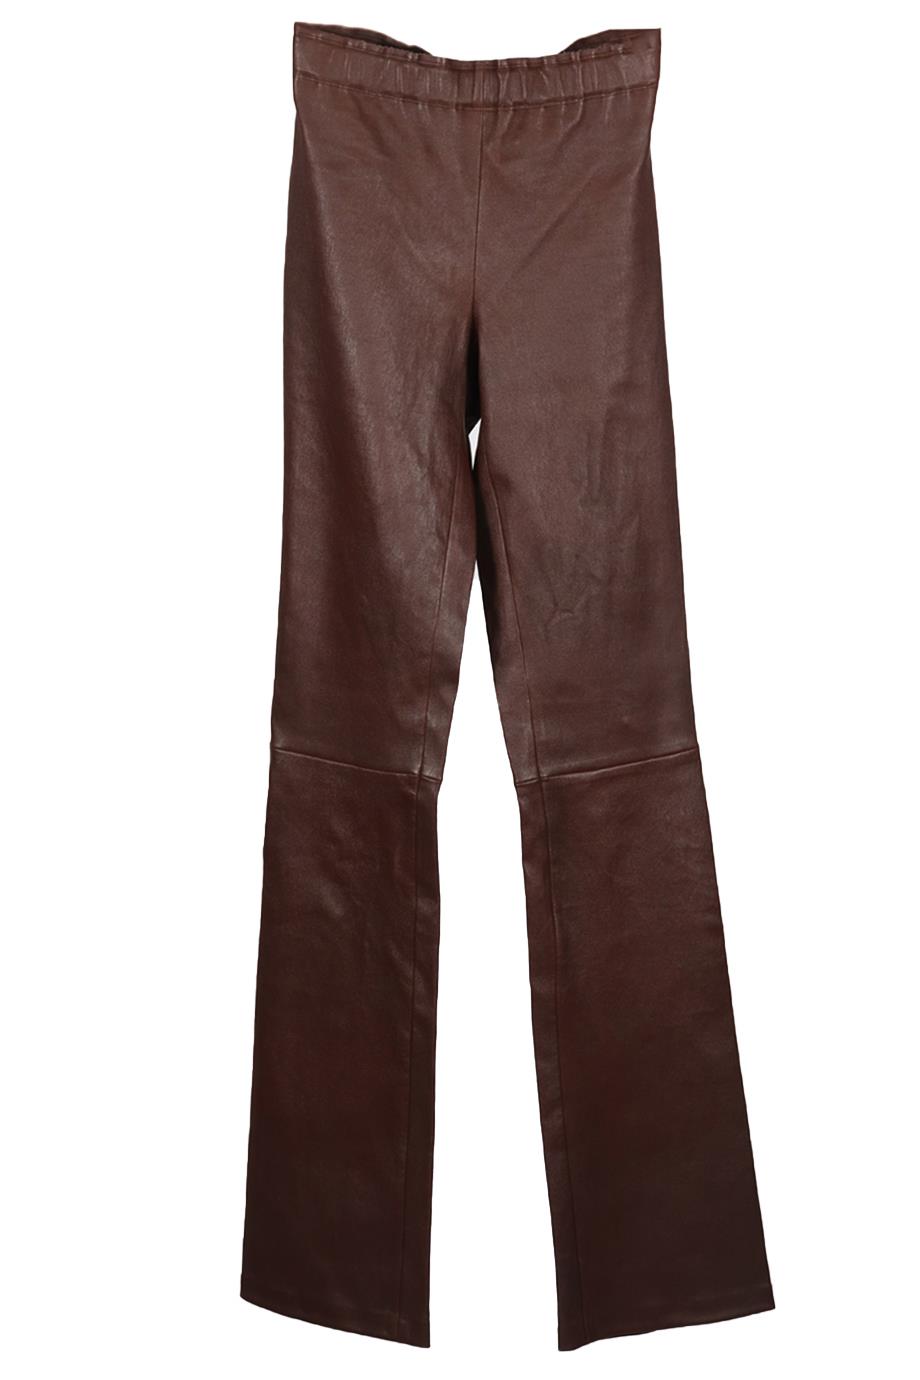 STOULS STRETCH LEATHER FLARED PANTS XSMALL